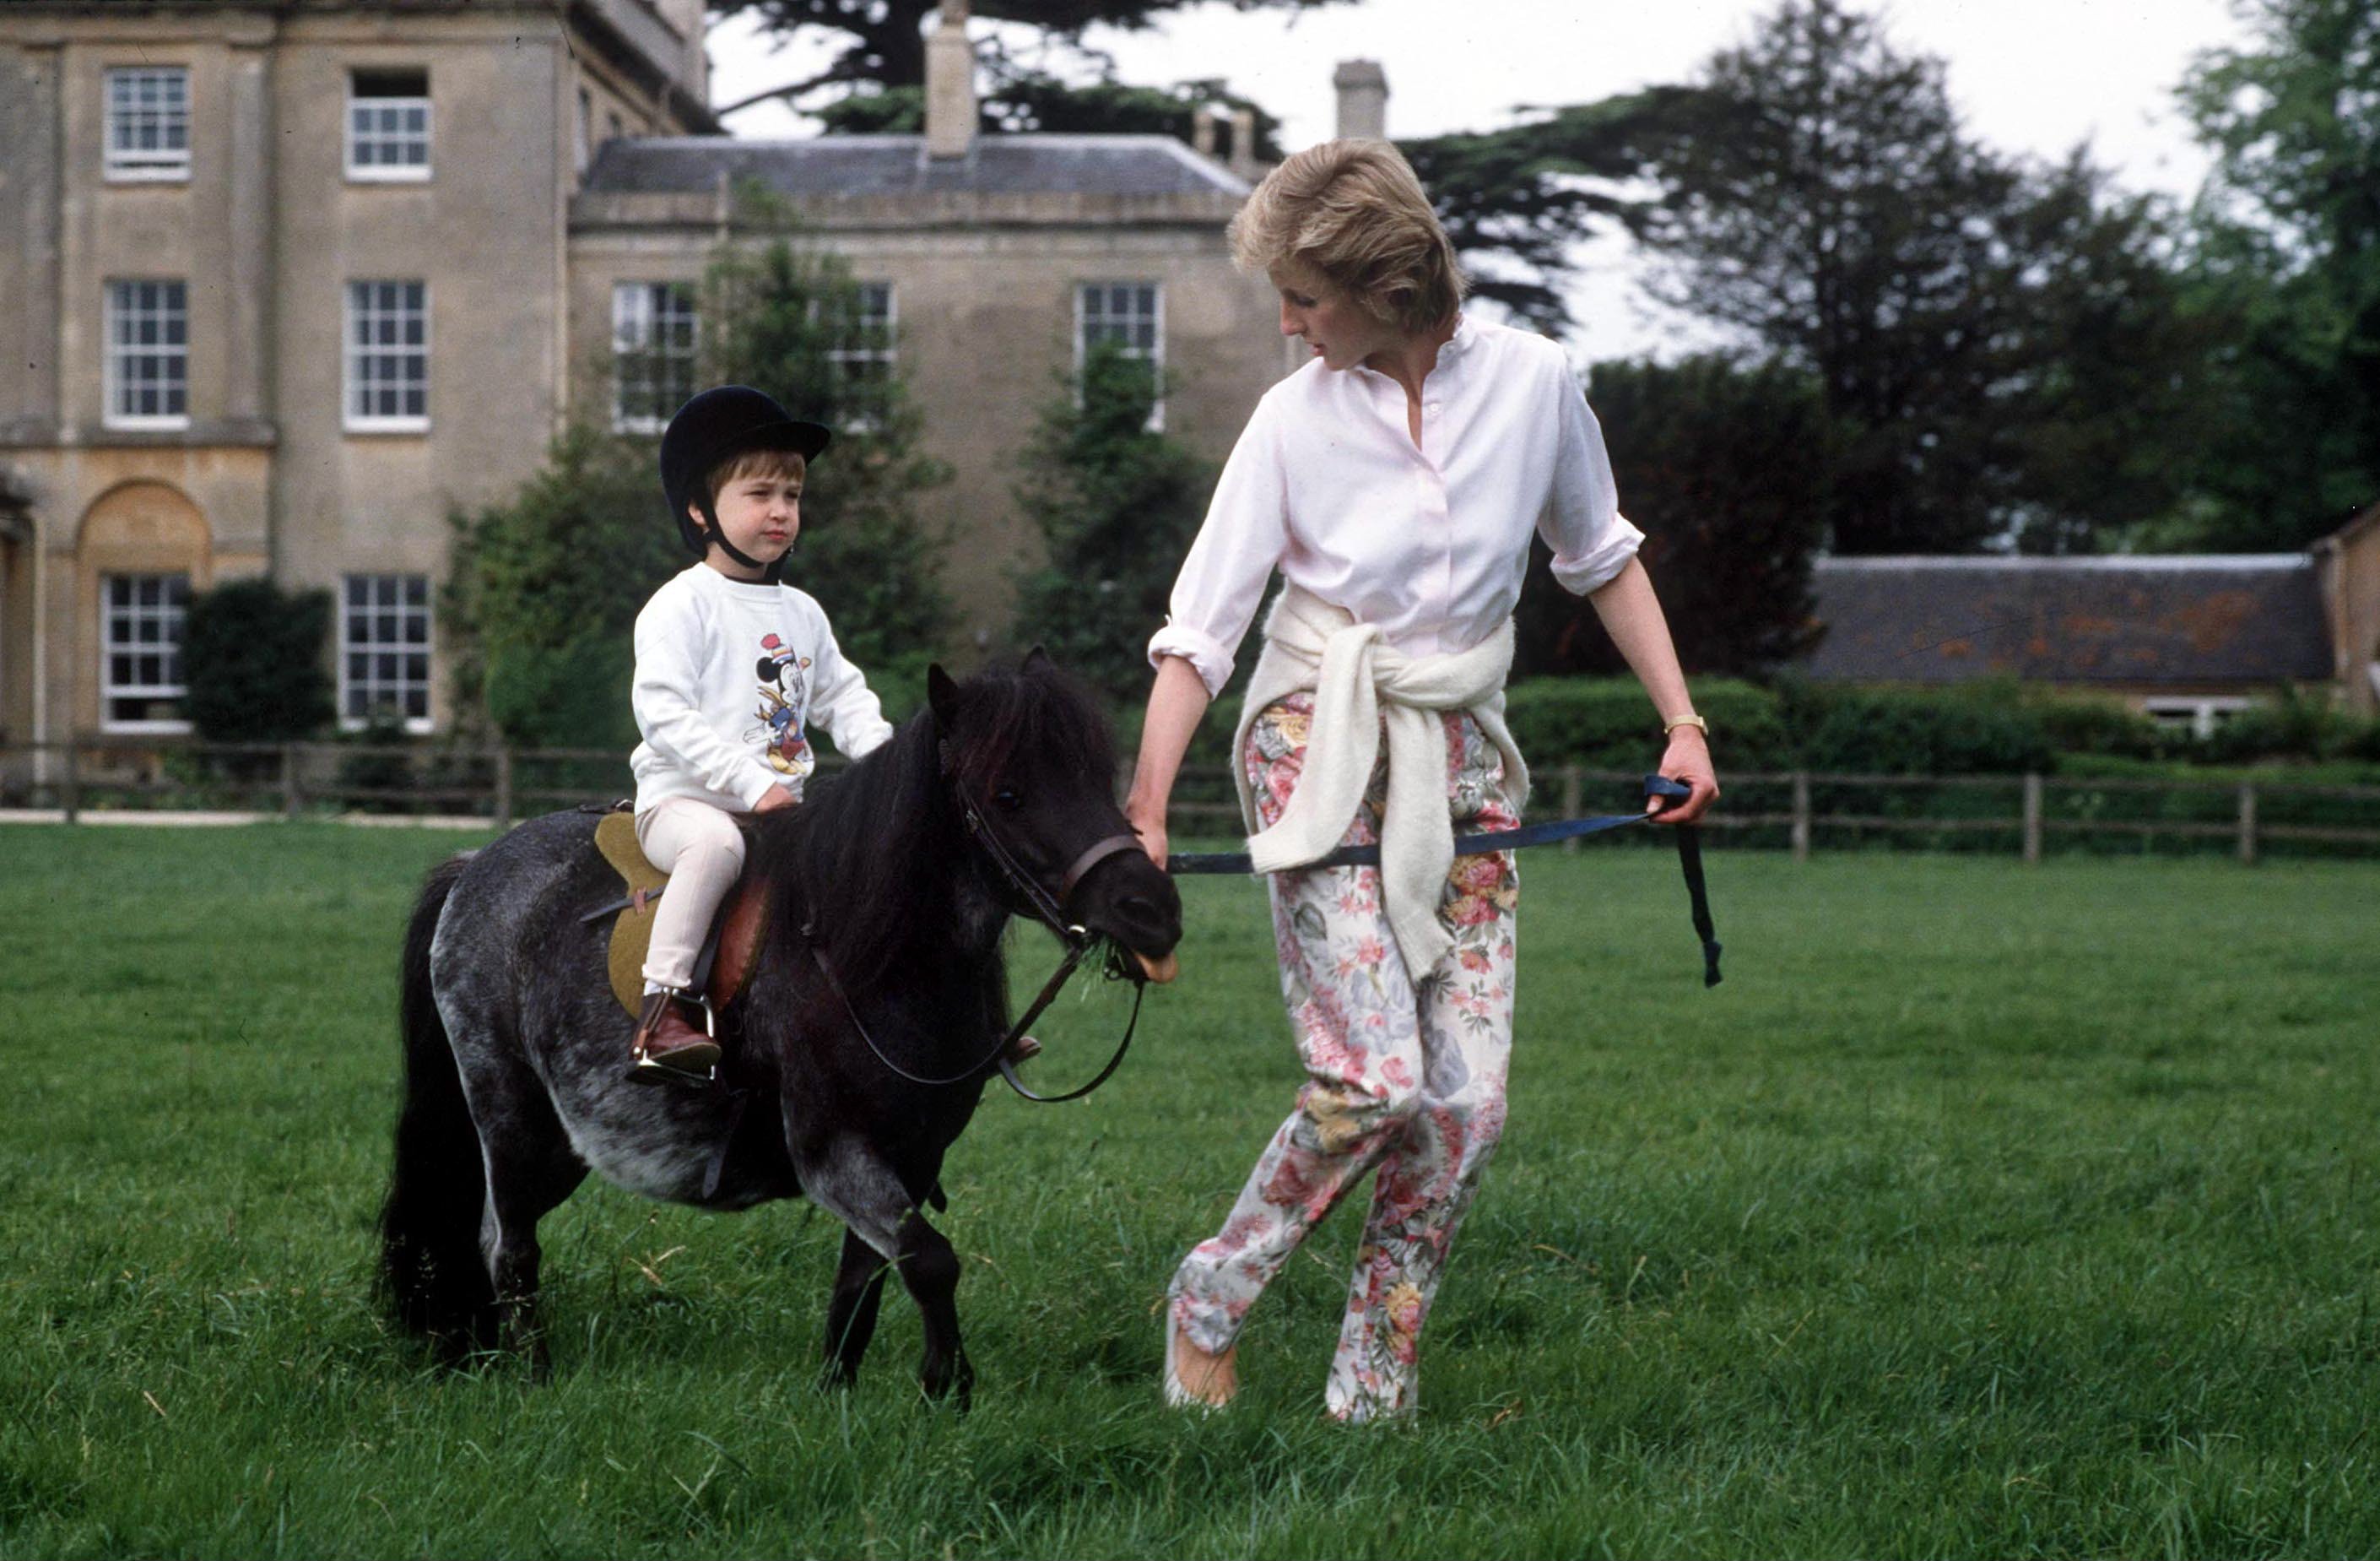 Prince William On His Pony At Highgrove With Princess Diana circa, 1986. | Source: Getty Images